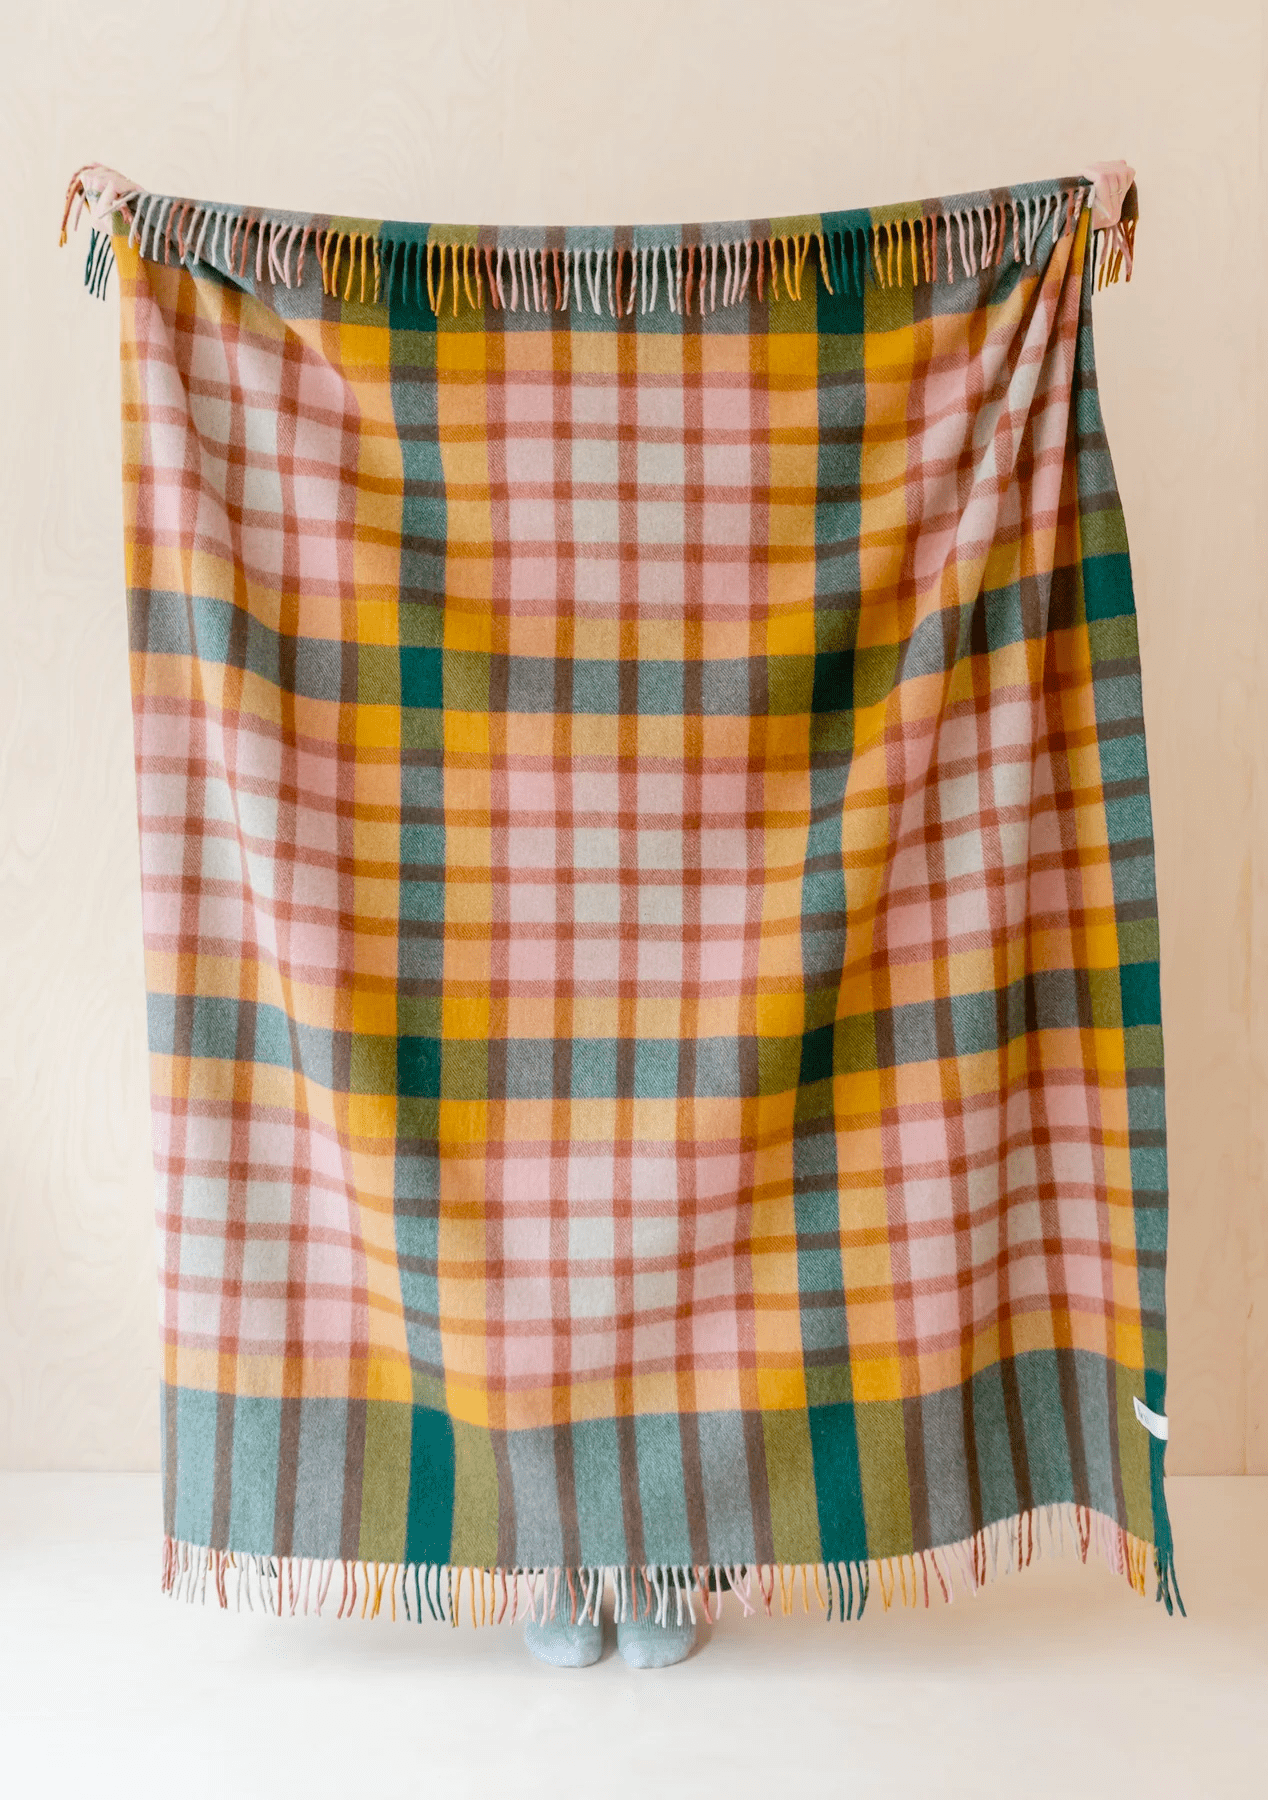 Recycled Wool Blanket in Green Gingham - The Bristol Artisan Handmade Sustainable Gifts and Homewares.